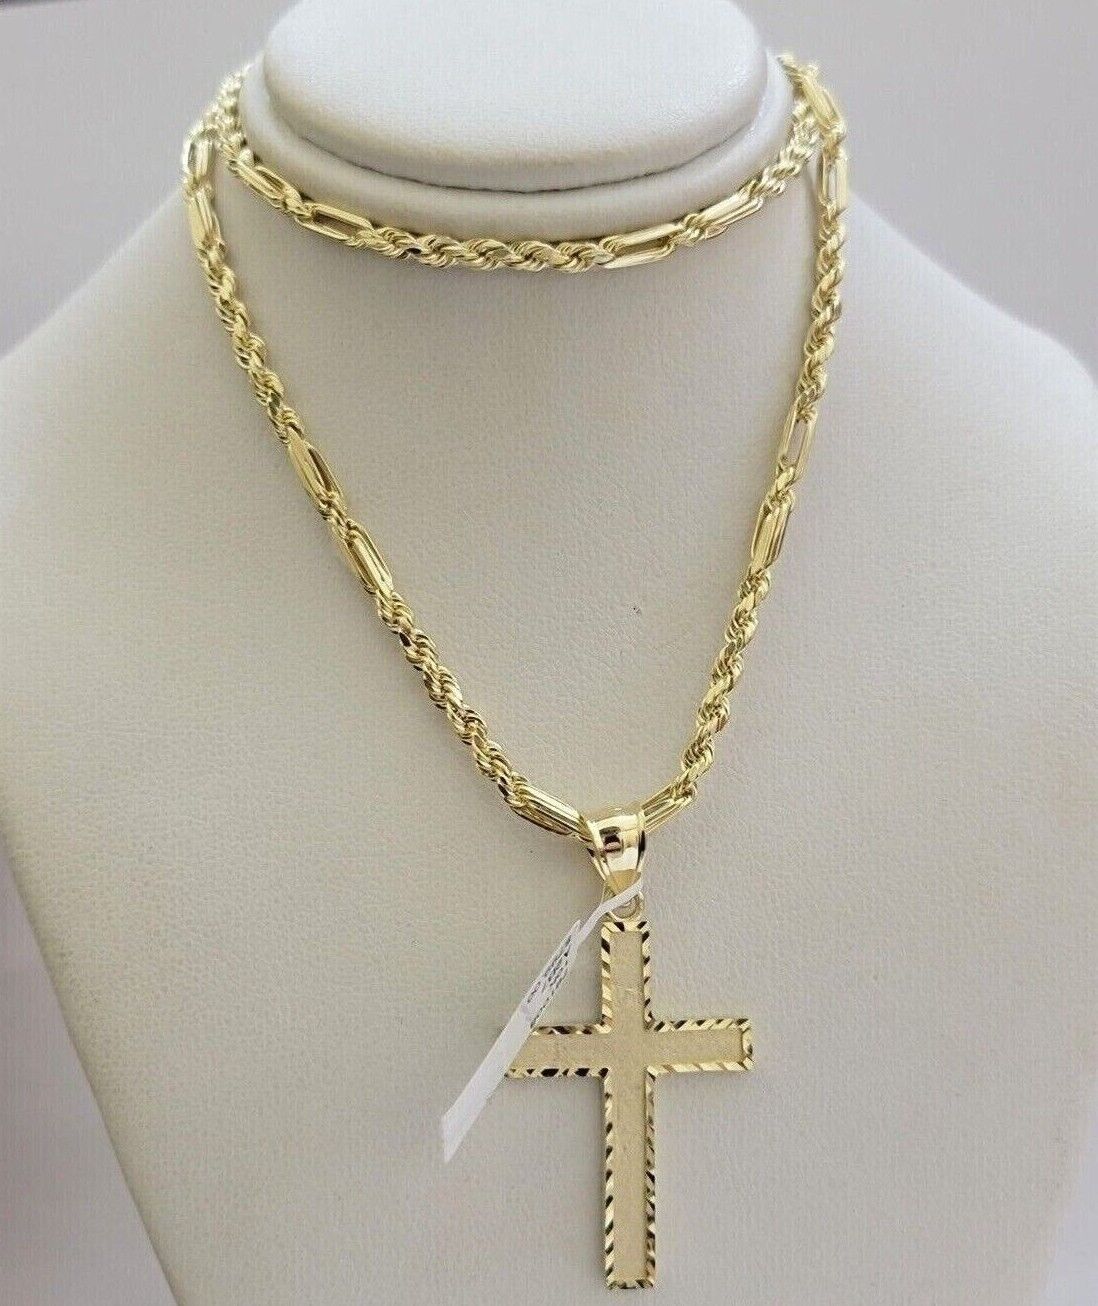 10k Gold Milano Rope Chain Plain Cross Charm Pendant Set 18-24'' Inches Necklace